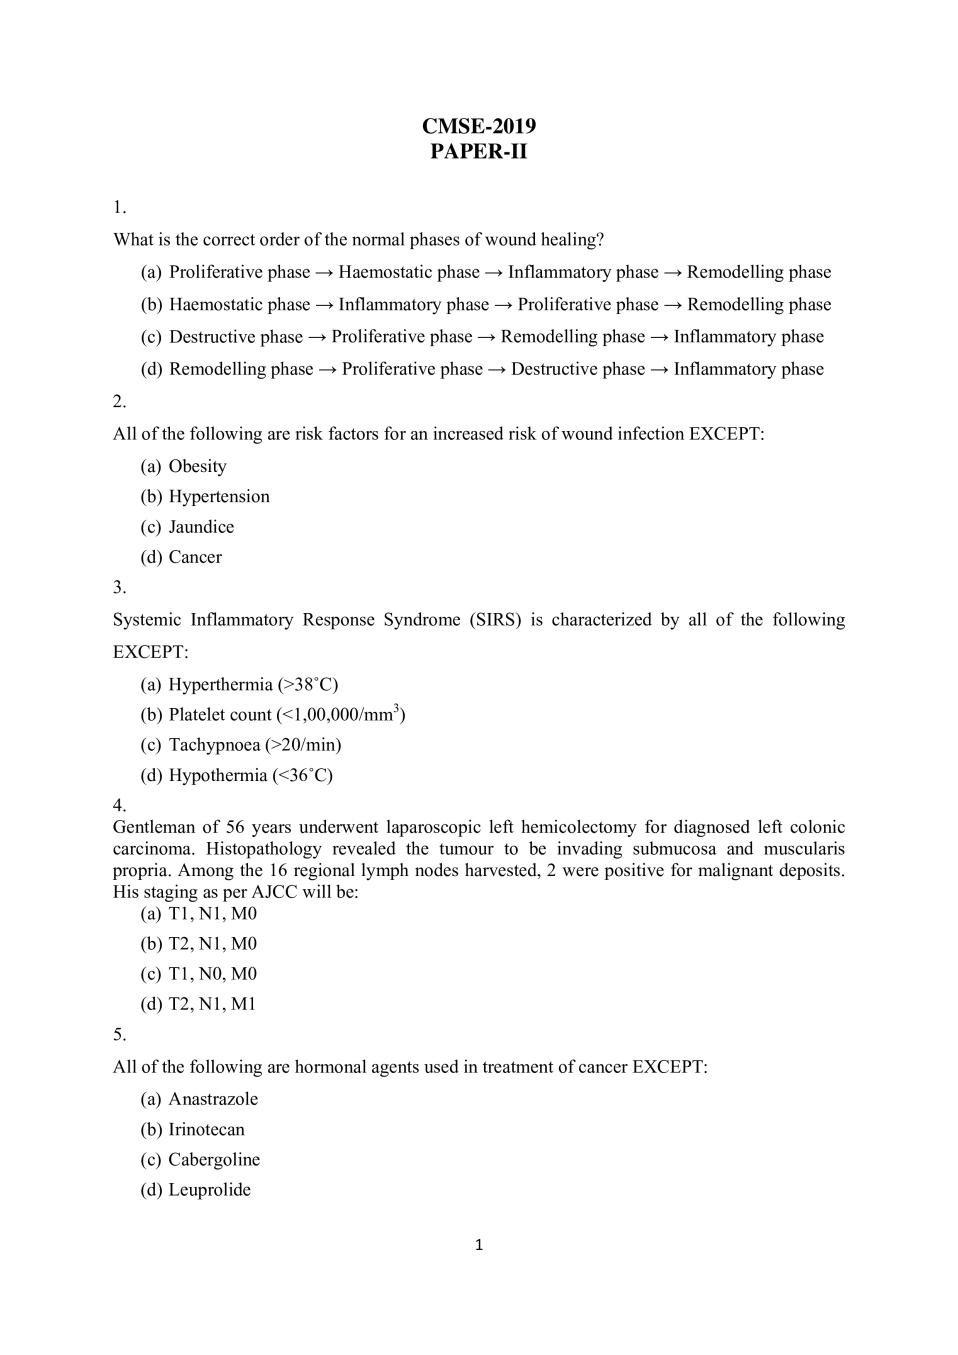 UPSC CMS 2019 Question Paper with Answers - Paper II - Page 1